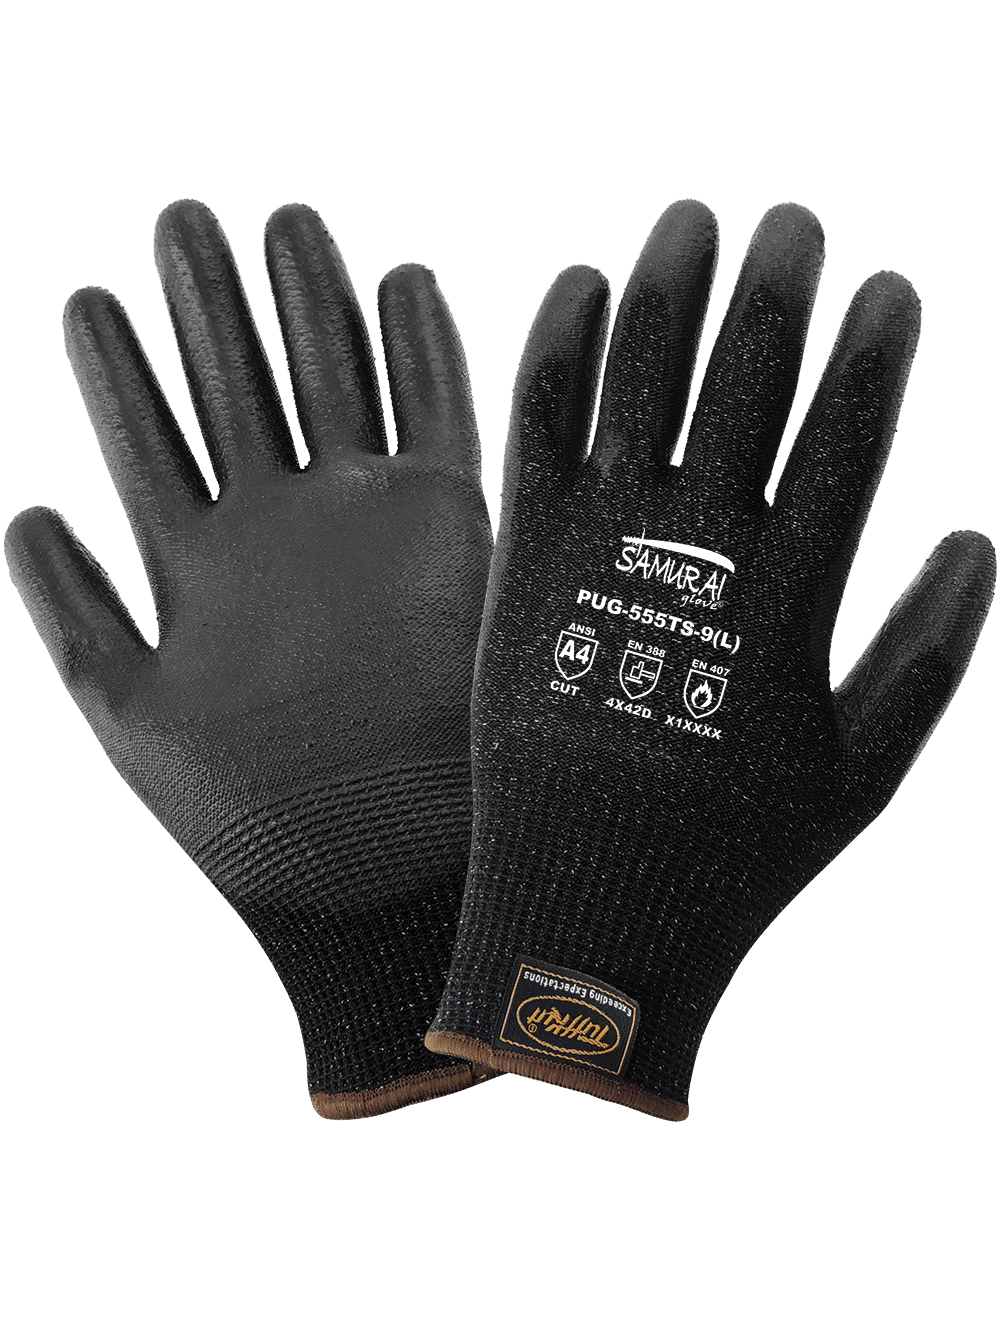 Work gloves cut resistance coated in polyurethane